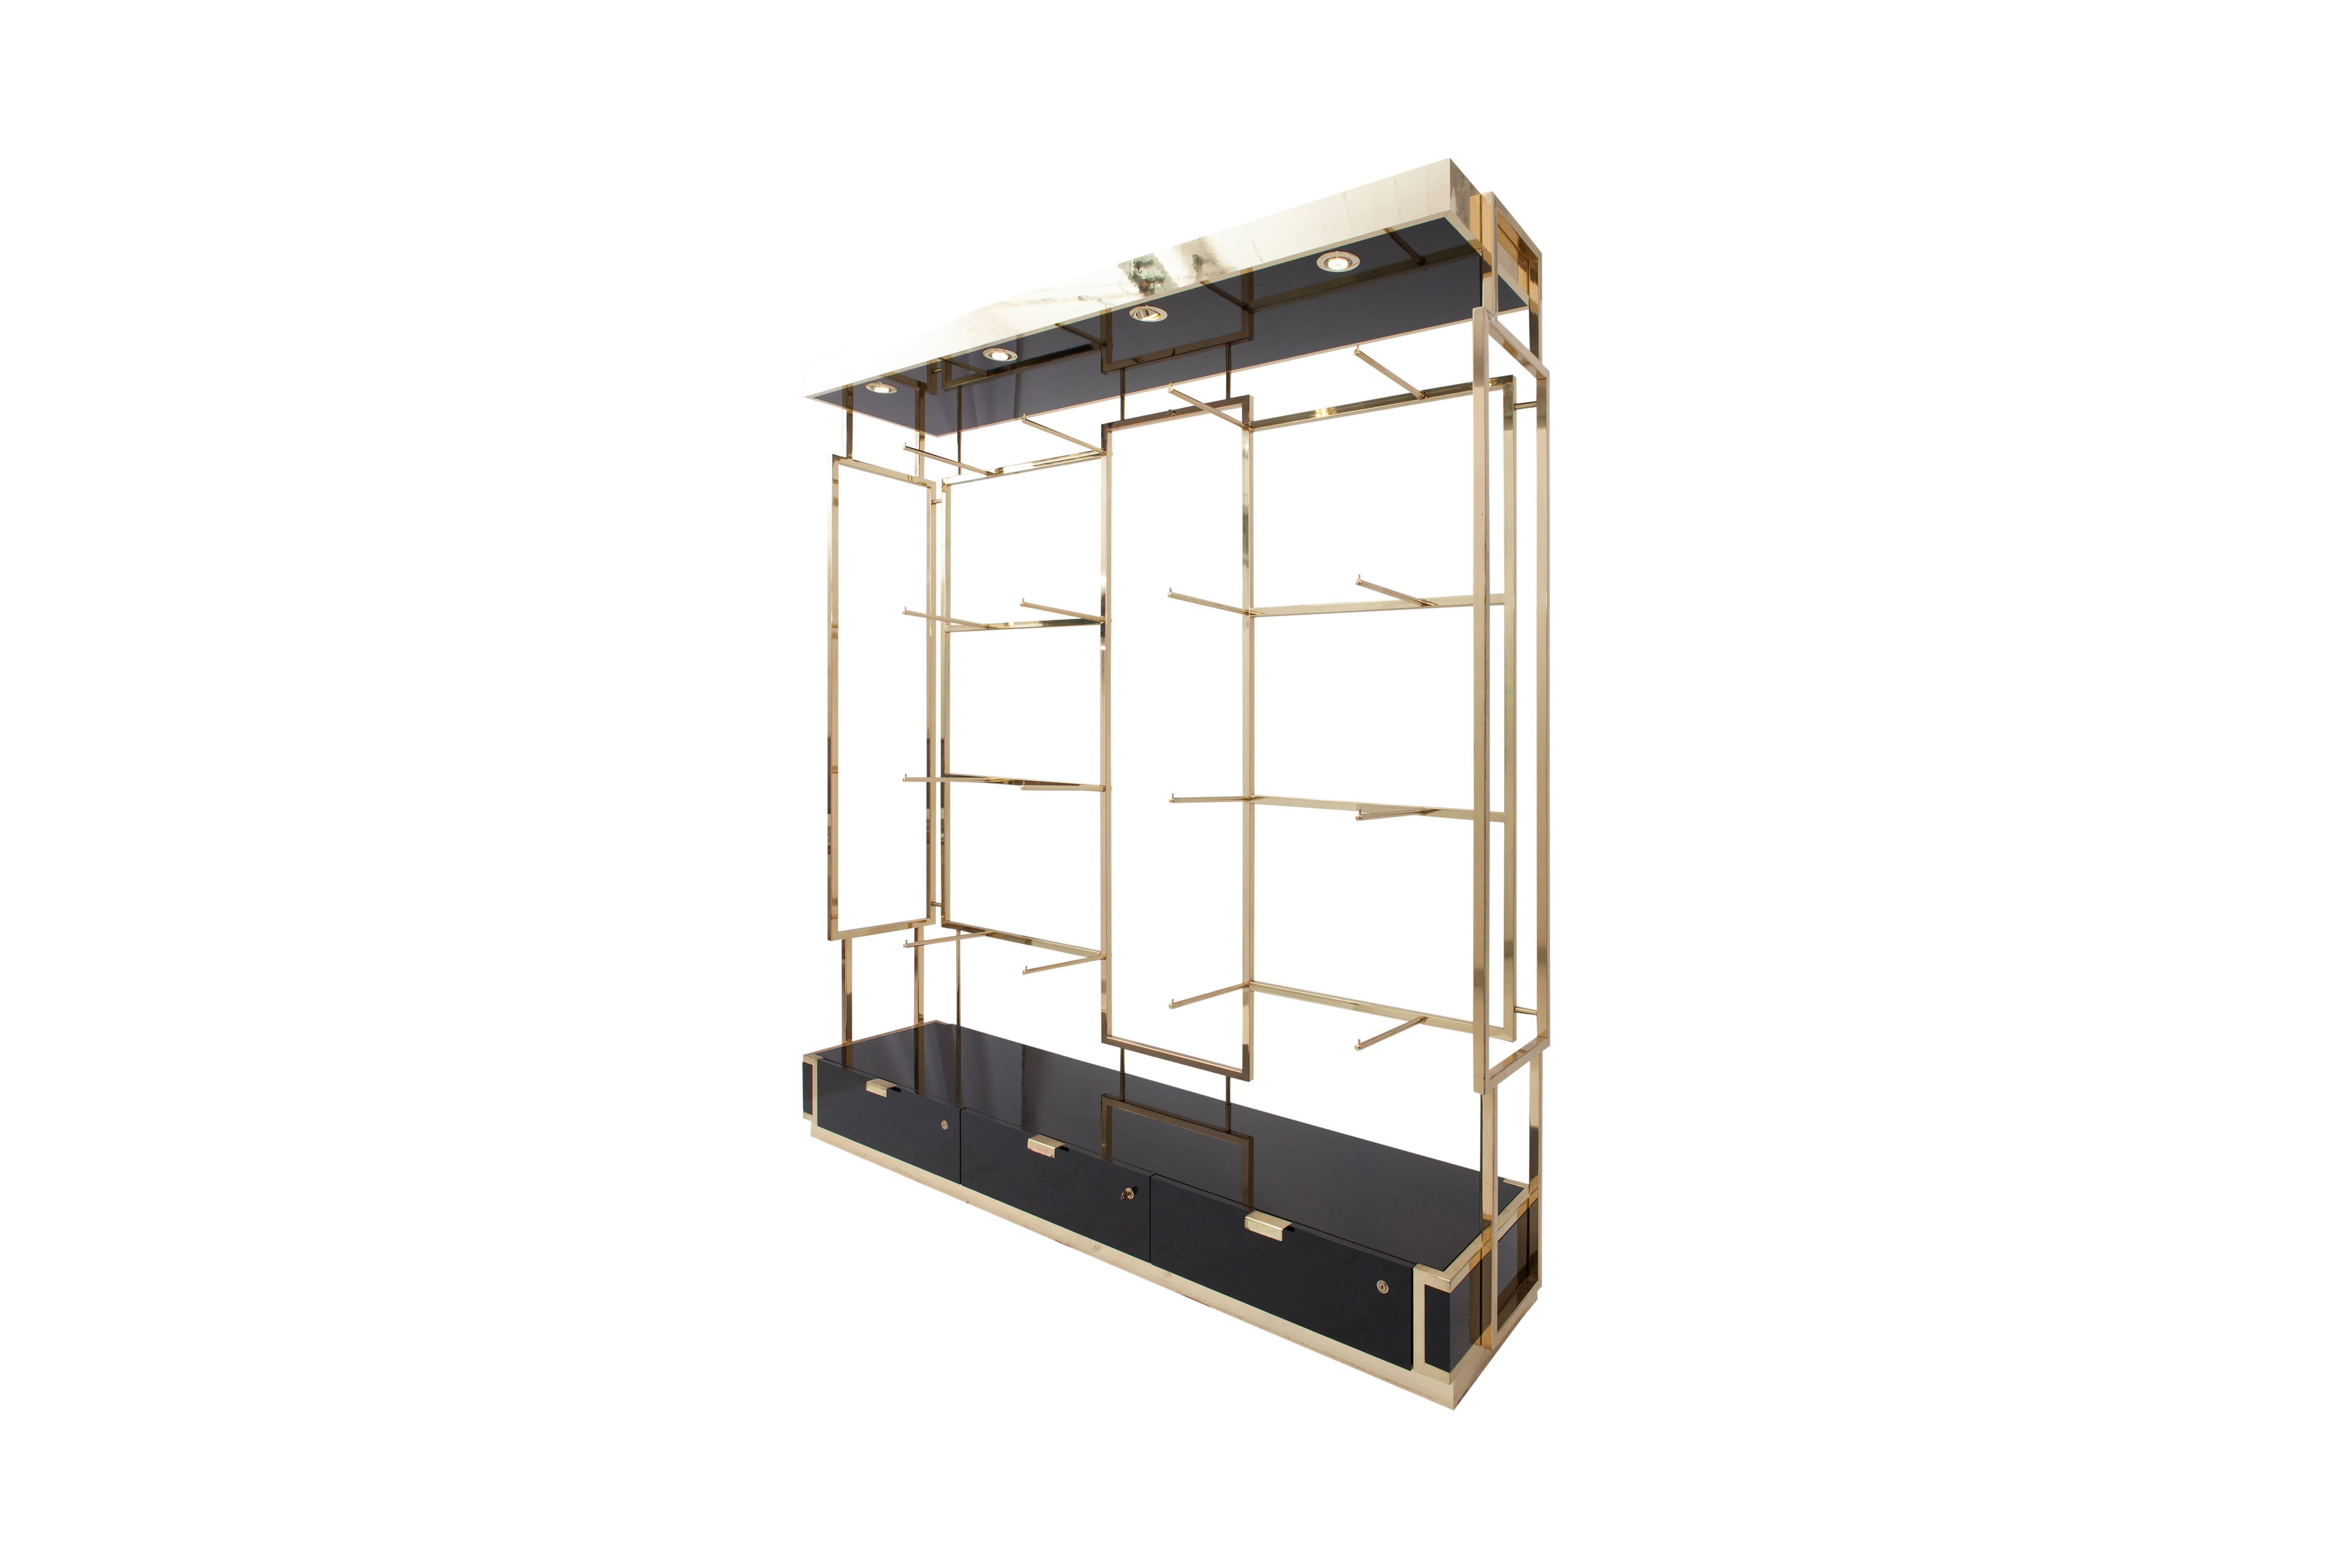 High-end display unit in black lacquer and brass.
Three drawers. Multiple brass hangers which could also support glass shelving.

Finished at the back, so this étagère could be used a a room dividing system, as well as a wall unit.

Excellent